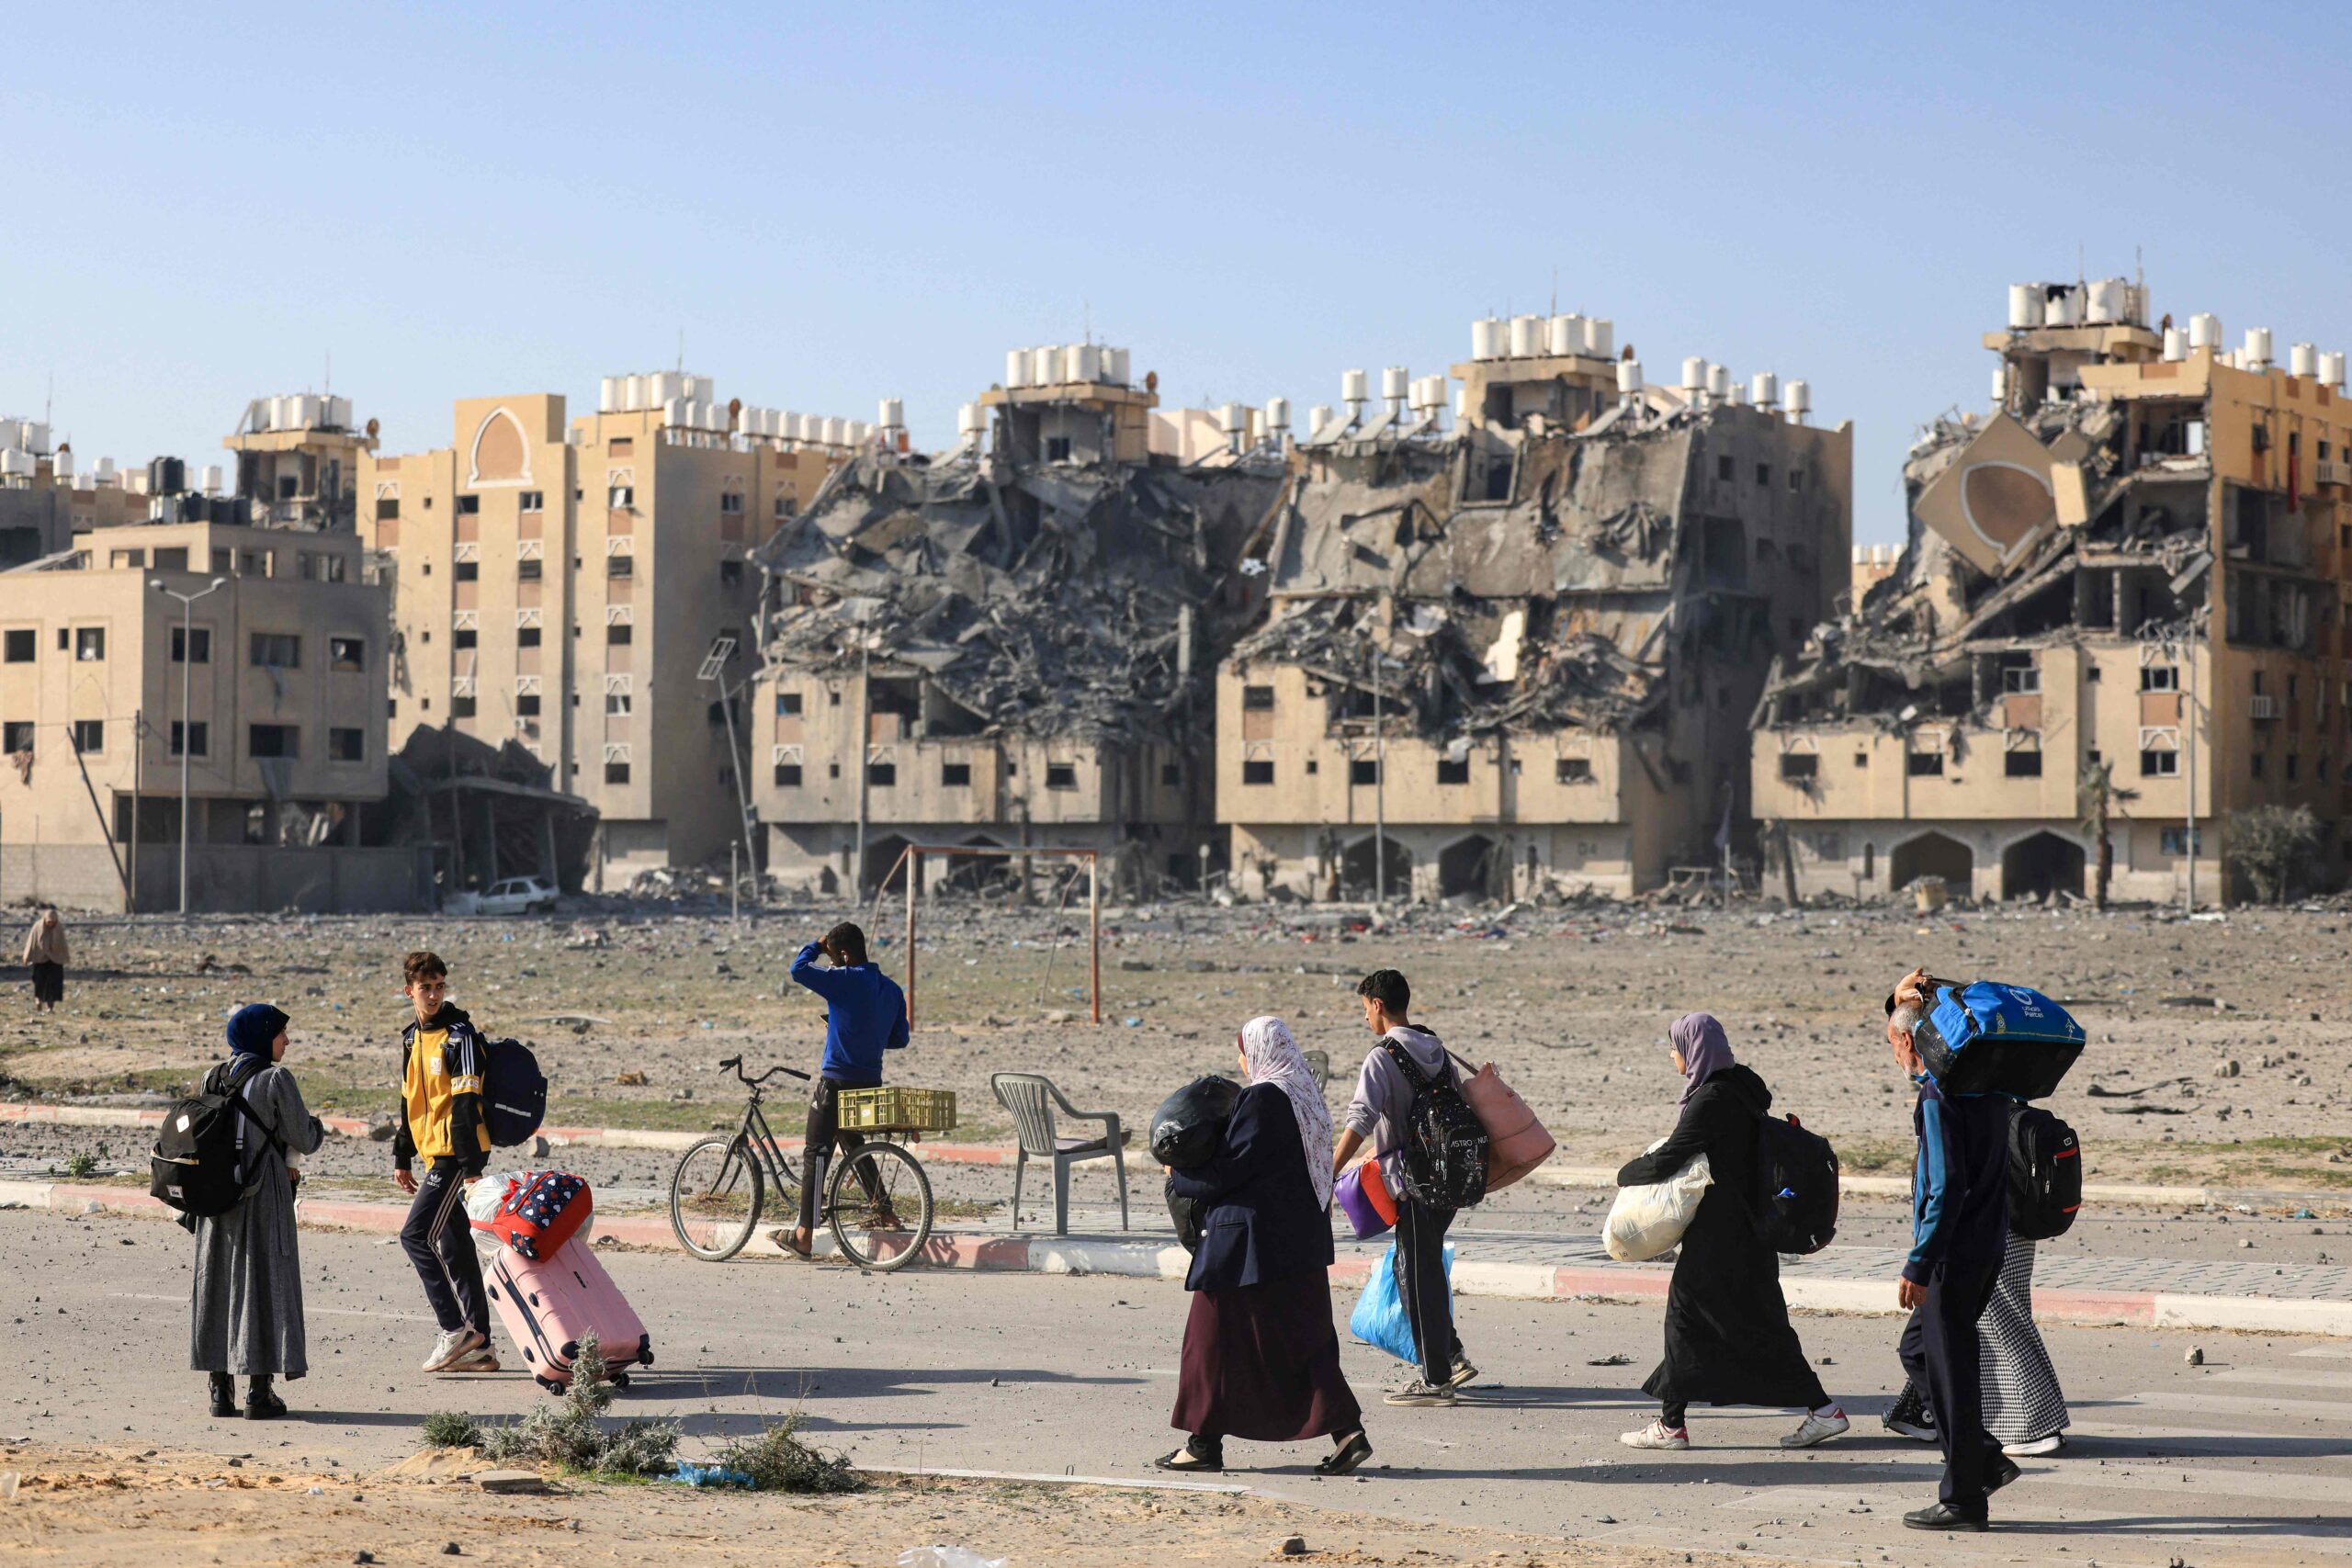 Residents of the Qatari-funded Hamad Town residential complex in Khan Yunis in the southern Gaza Strip, carry some of their belongings as they flee their homes after an Israeli strike, on December 2, 2023. A temporary truce between Israel and Hamas expired on December 1, with the Israeli army saying combat operations had resumed, accusing Hamas of violating the operational pause. (Photo by MAHMUD HAMS / AFP)